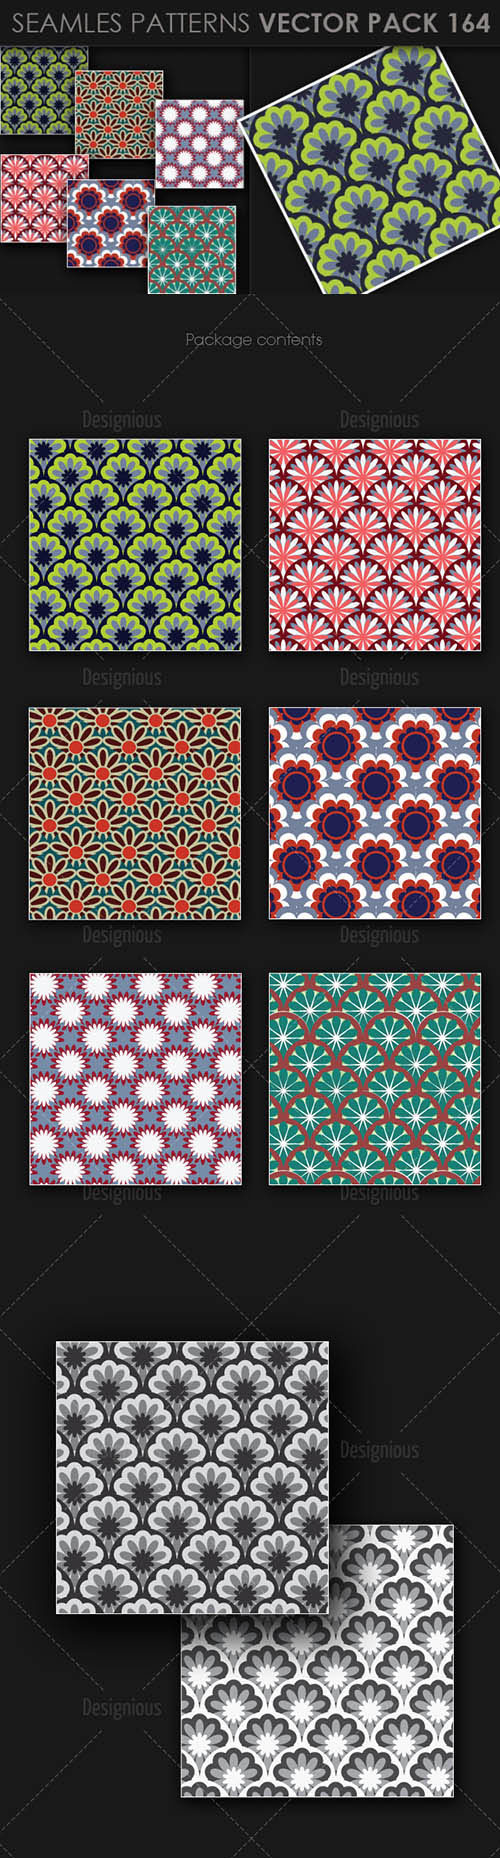 6 Seamless Patterns Vector Pack 164